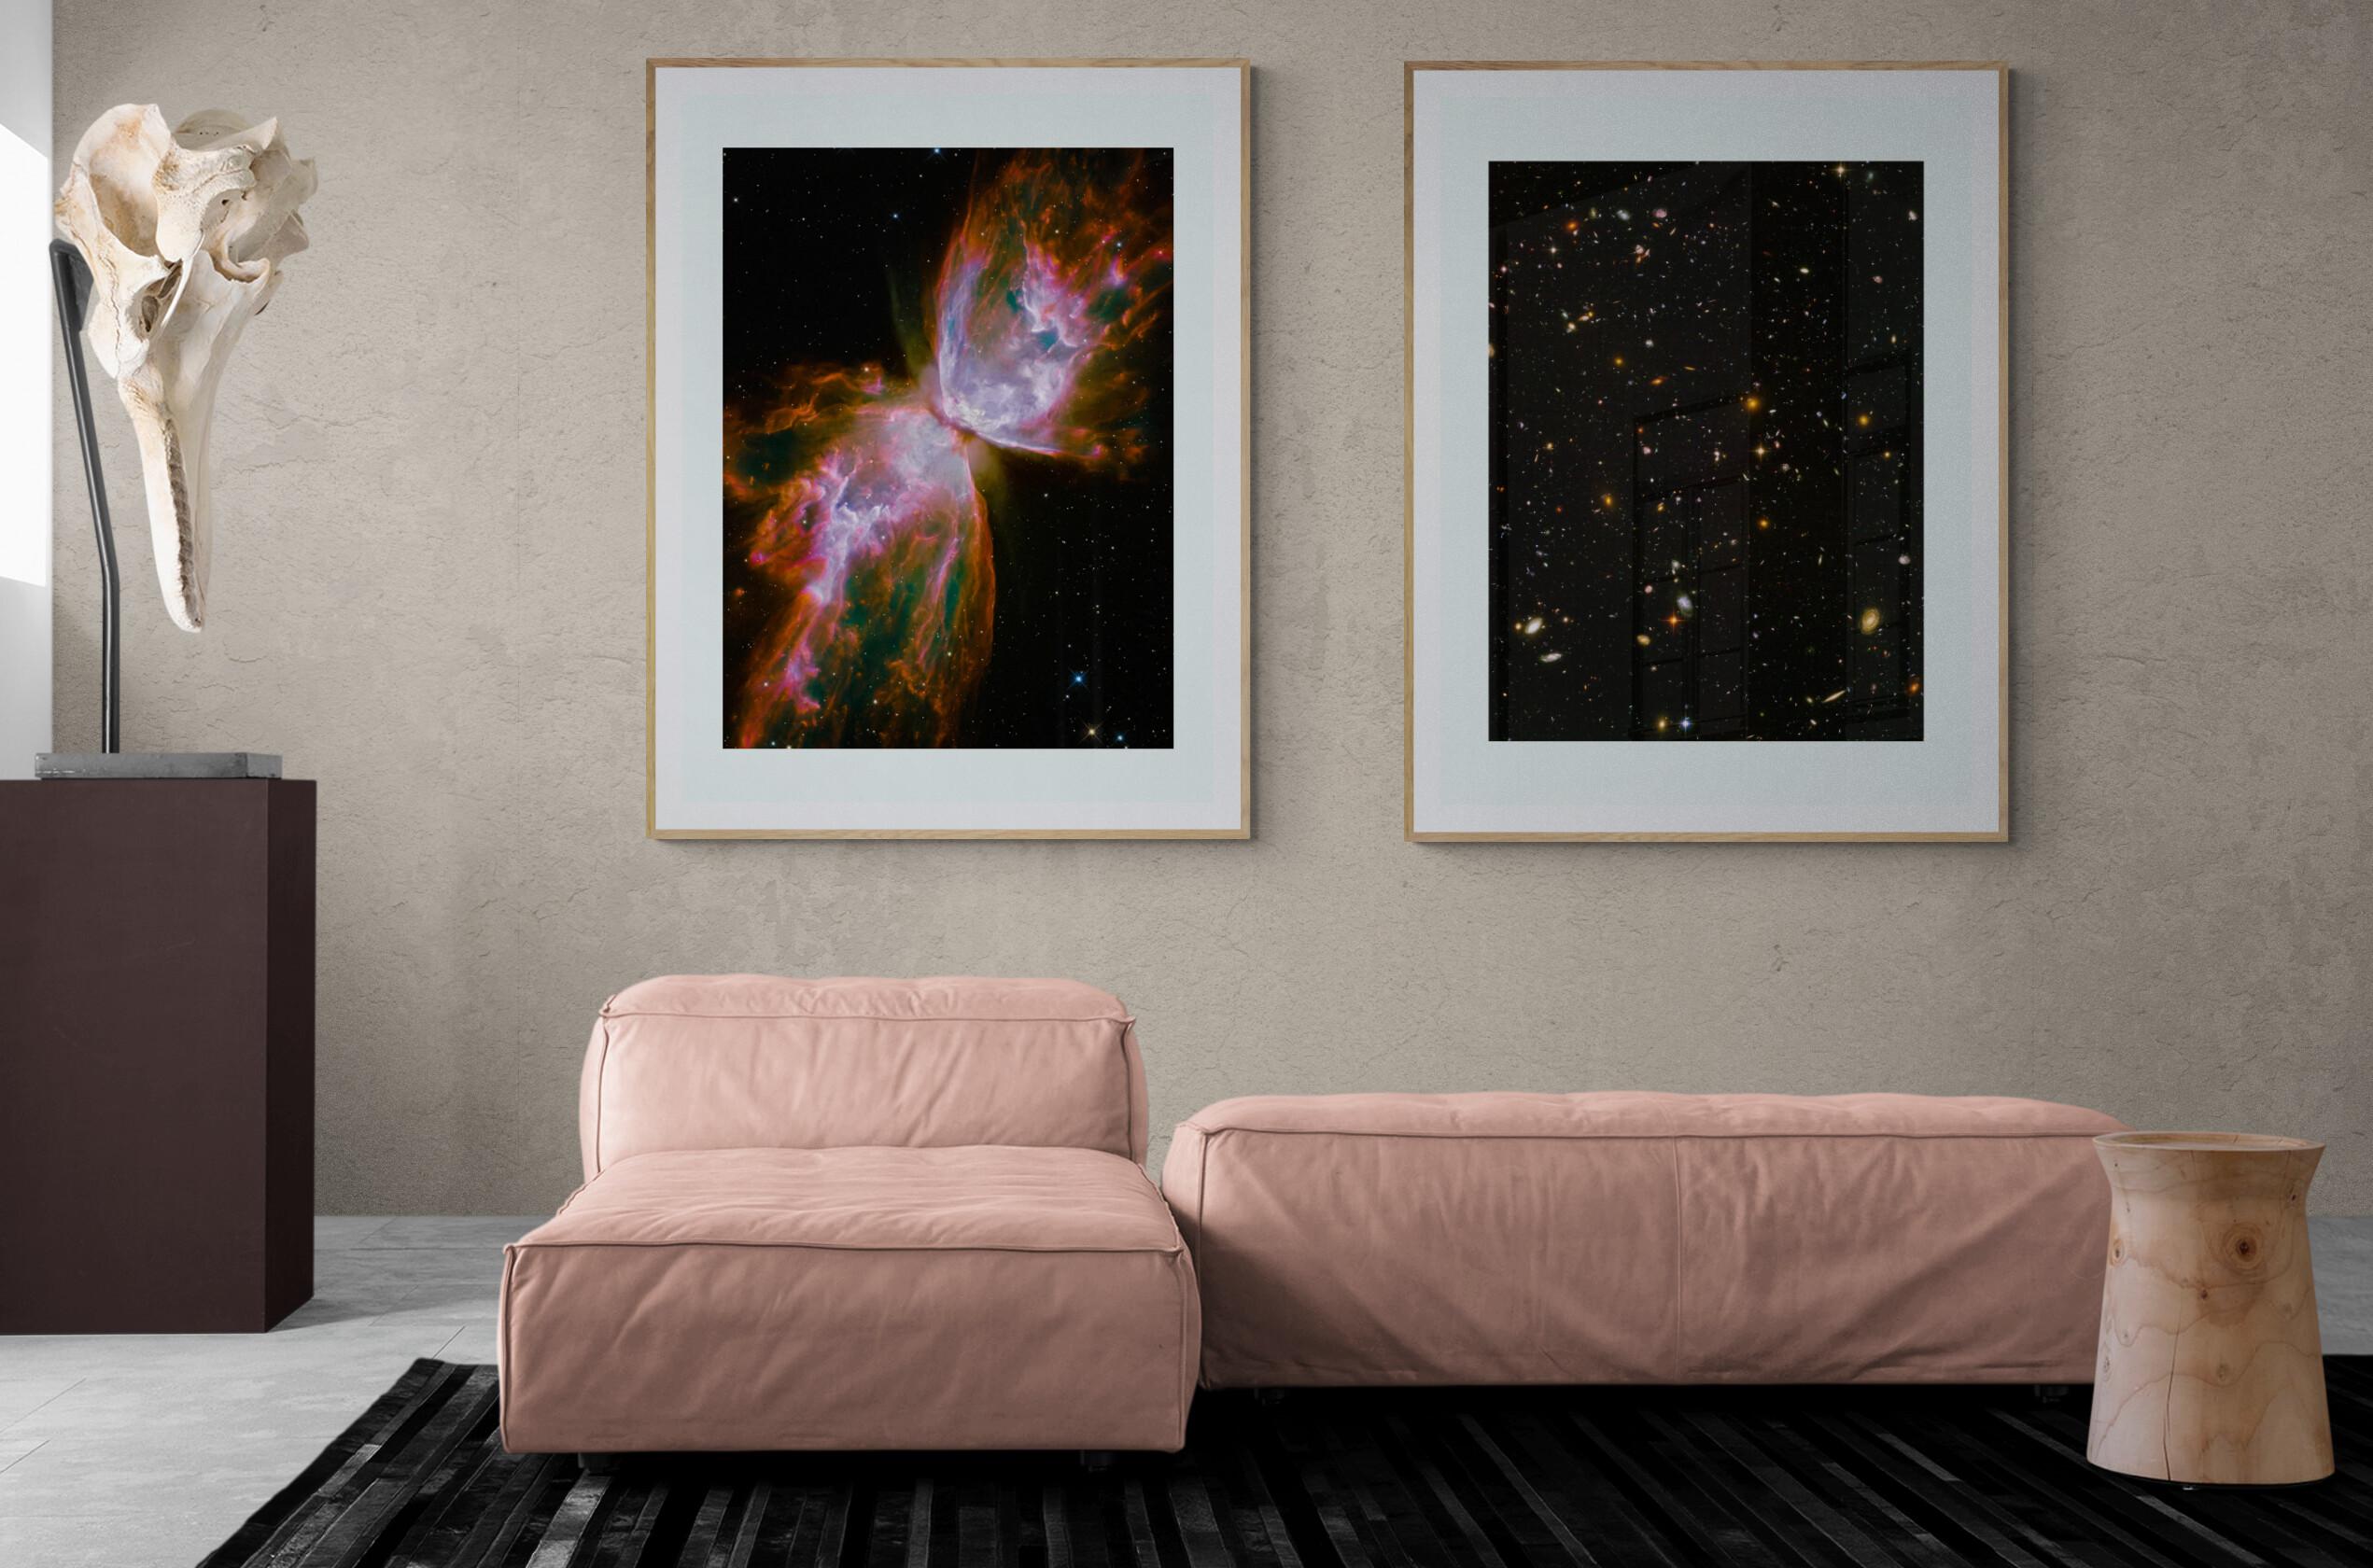 Original museum grade exhibition prints on acid-free archival photographic paper.

These are the highest quality NASA prints ever produced. 

The bright clusters and nebulae of planet Earth's night sky are often named for flowers or insects. Though